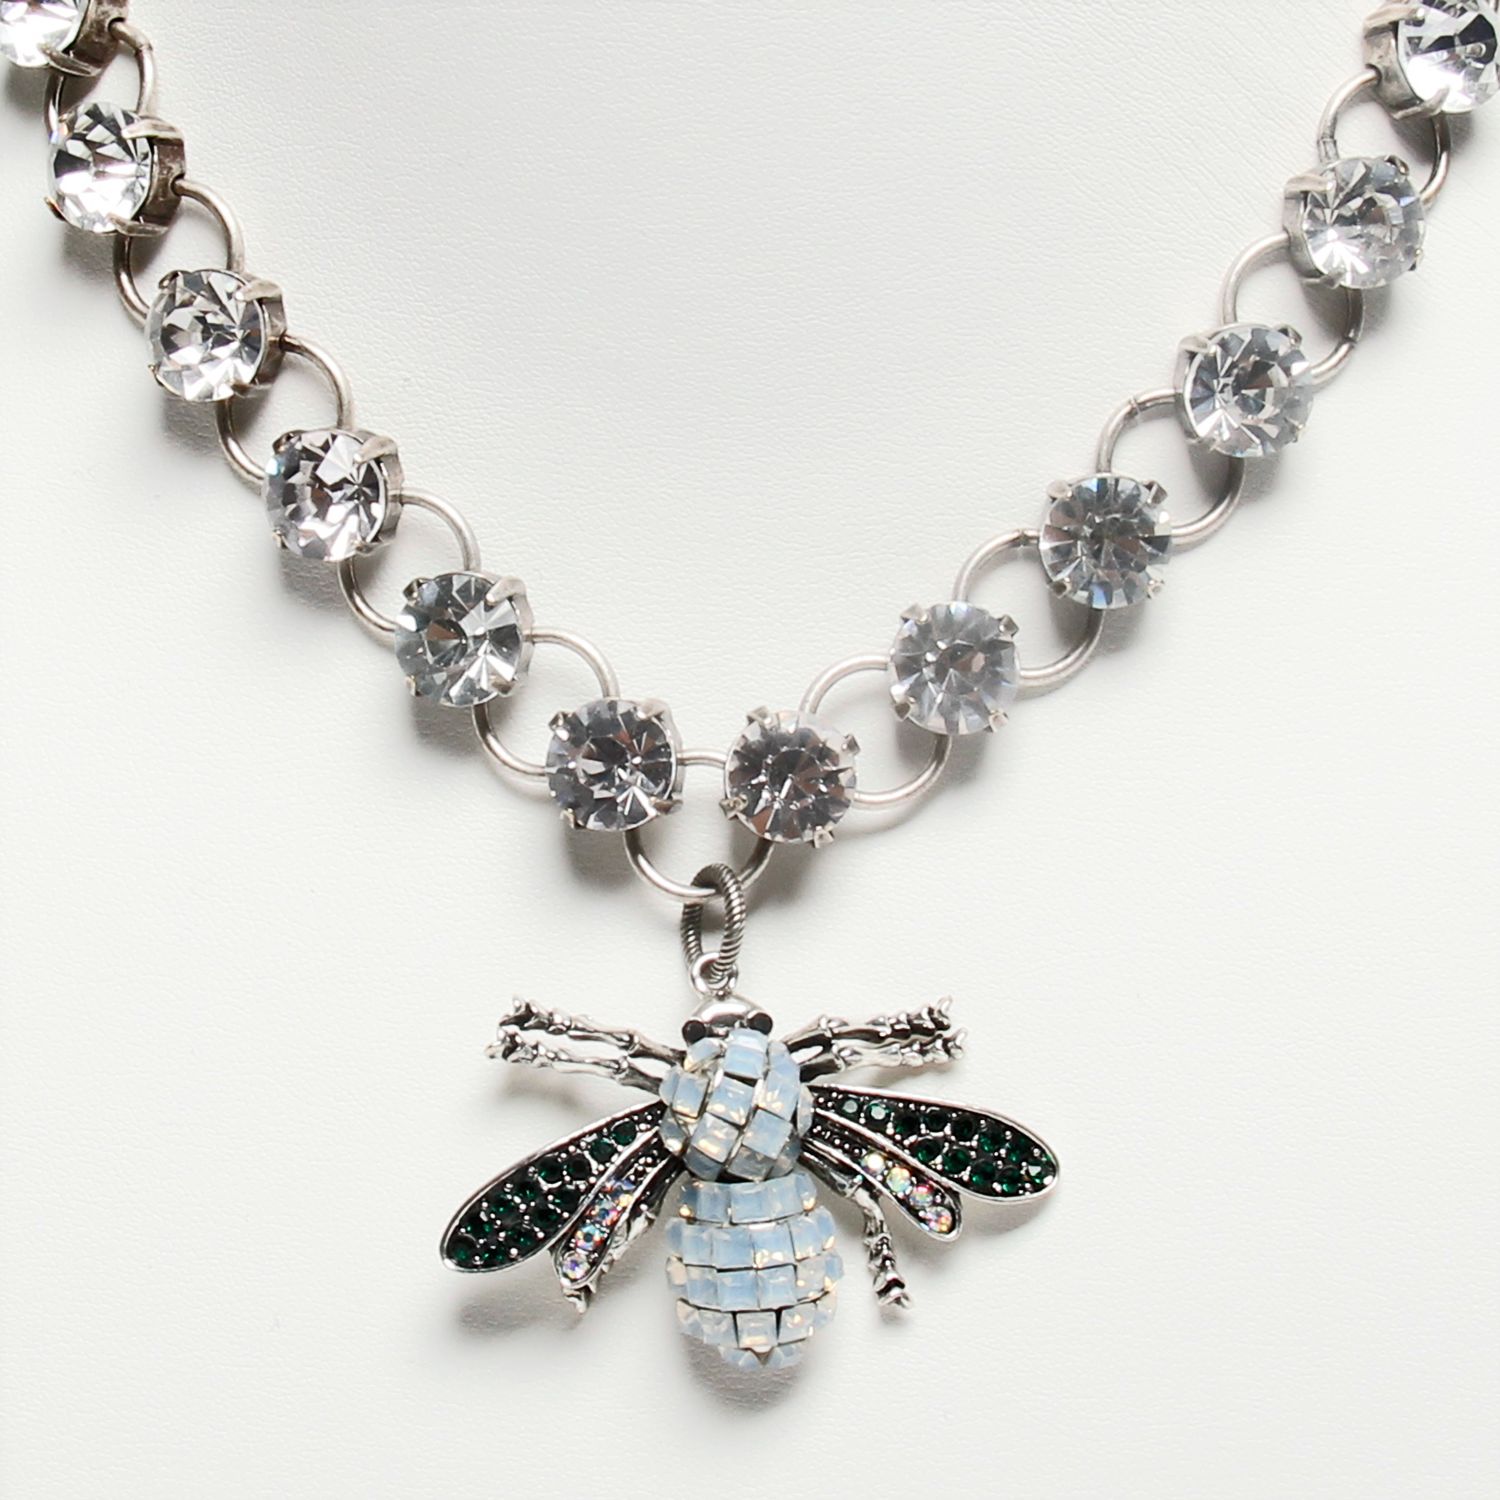 Valentine Rouge: Silver Queen Bee Lariat Necklace Product Image 5 of 5